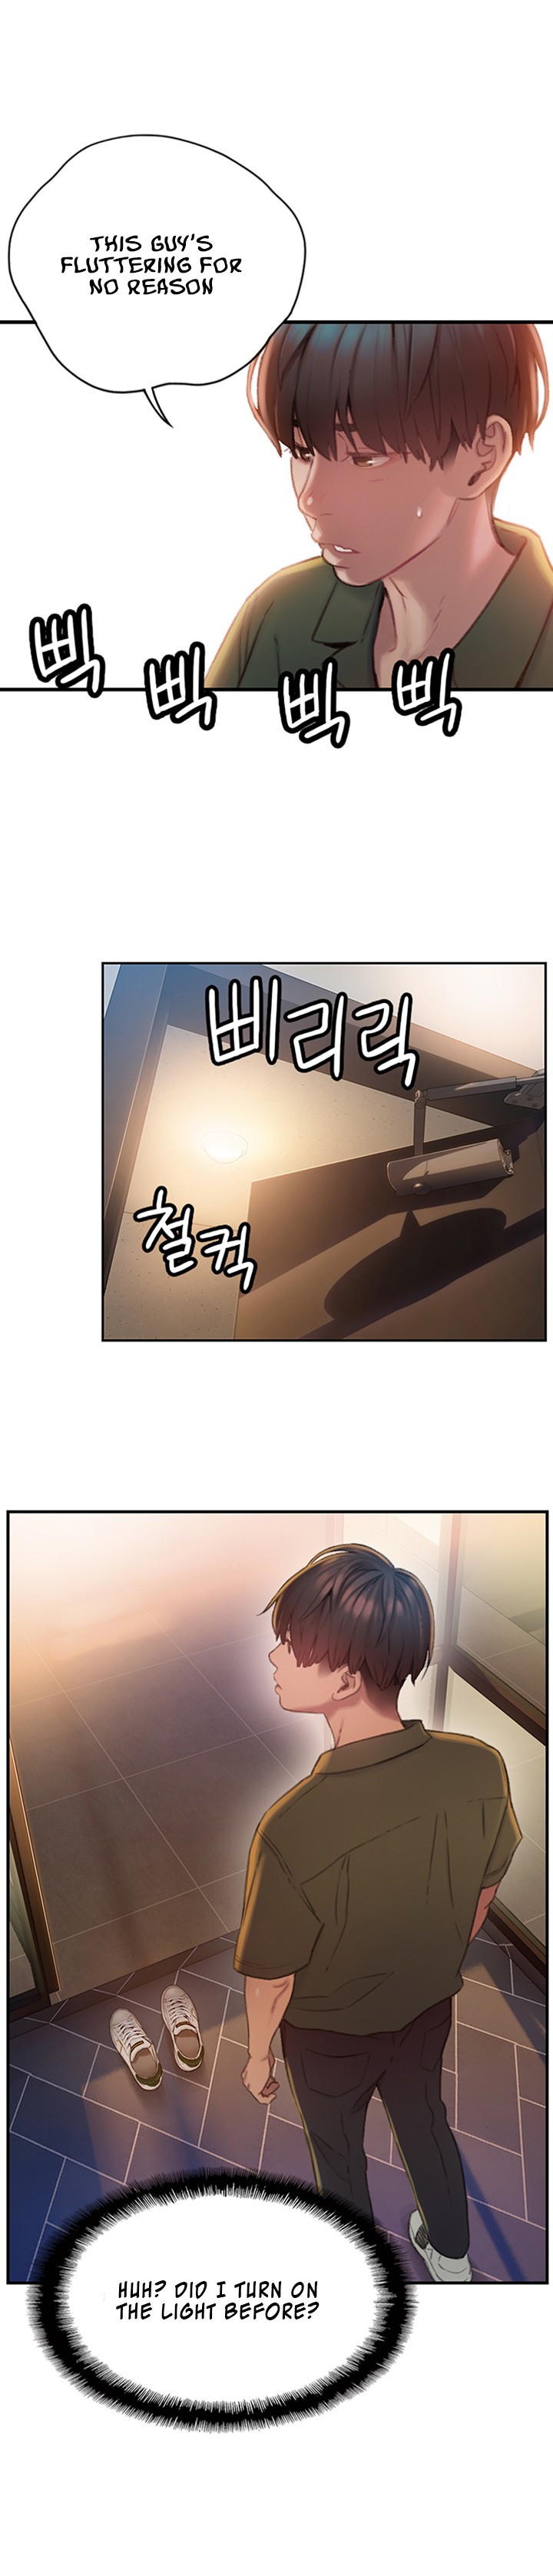 [Park Hyeongjun] Love Limit Exceeded (01-22) Ongoing - Page 31